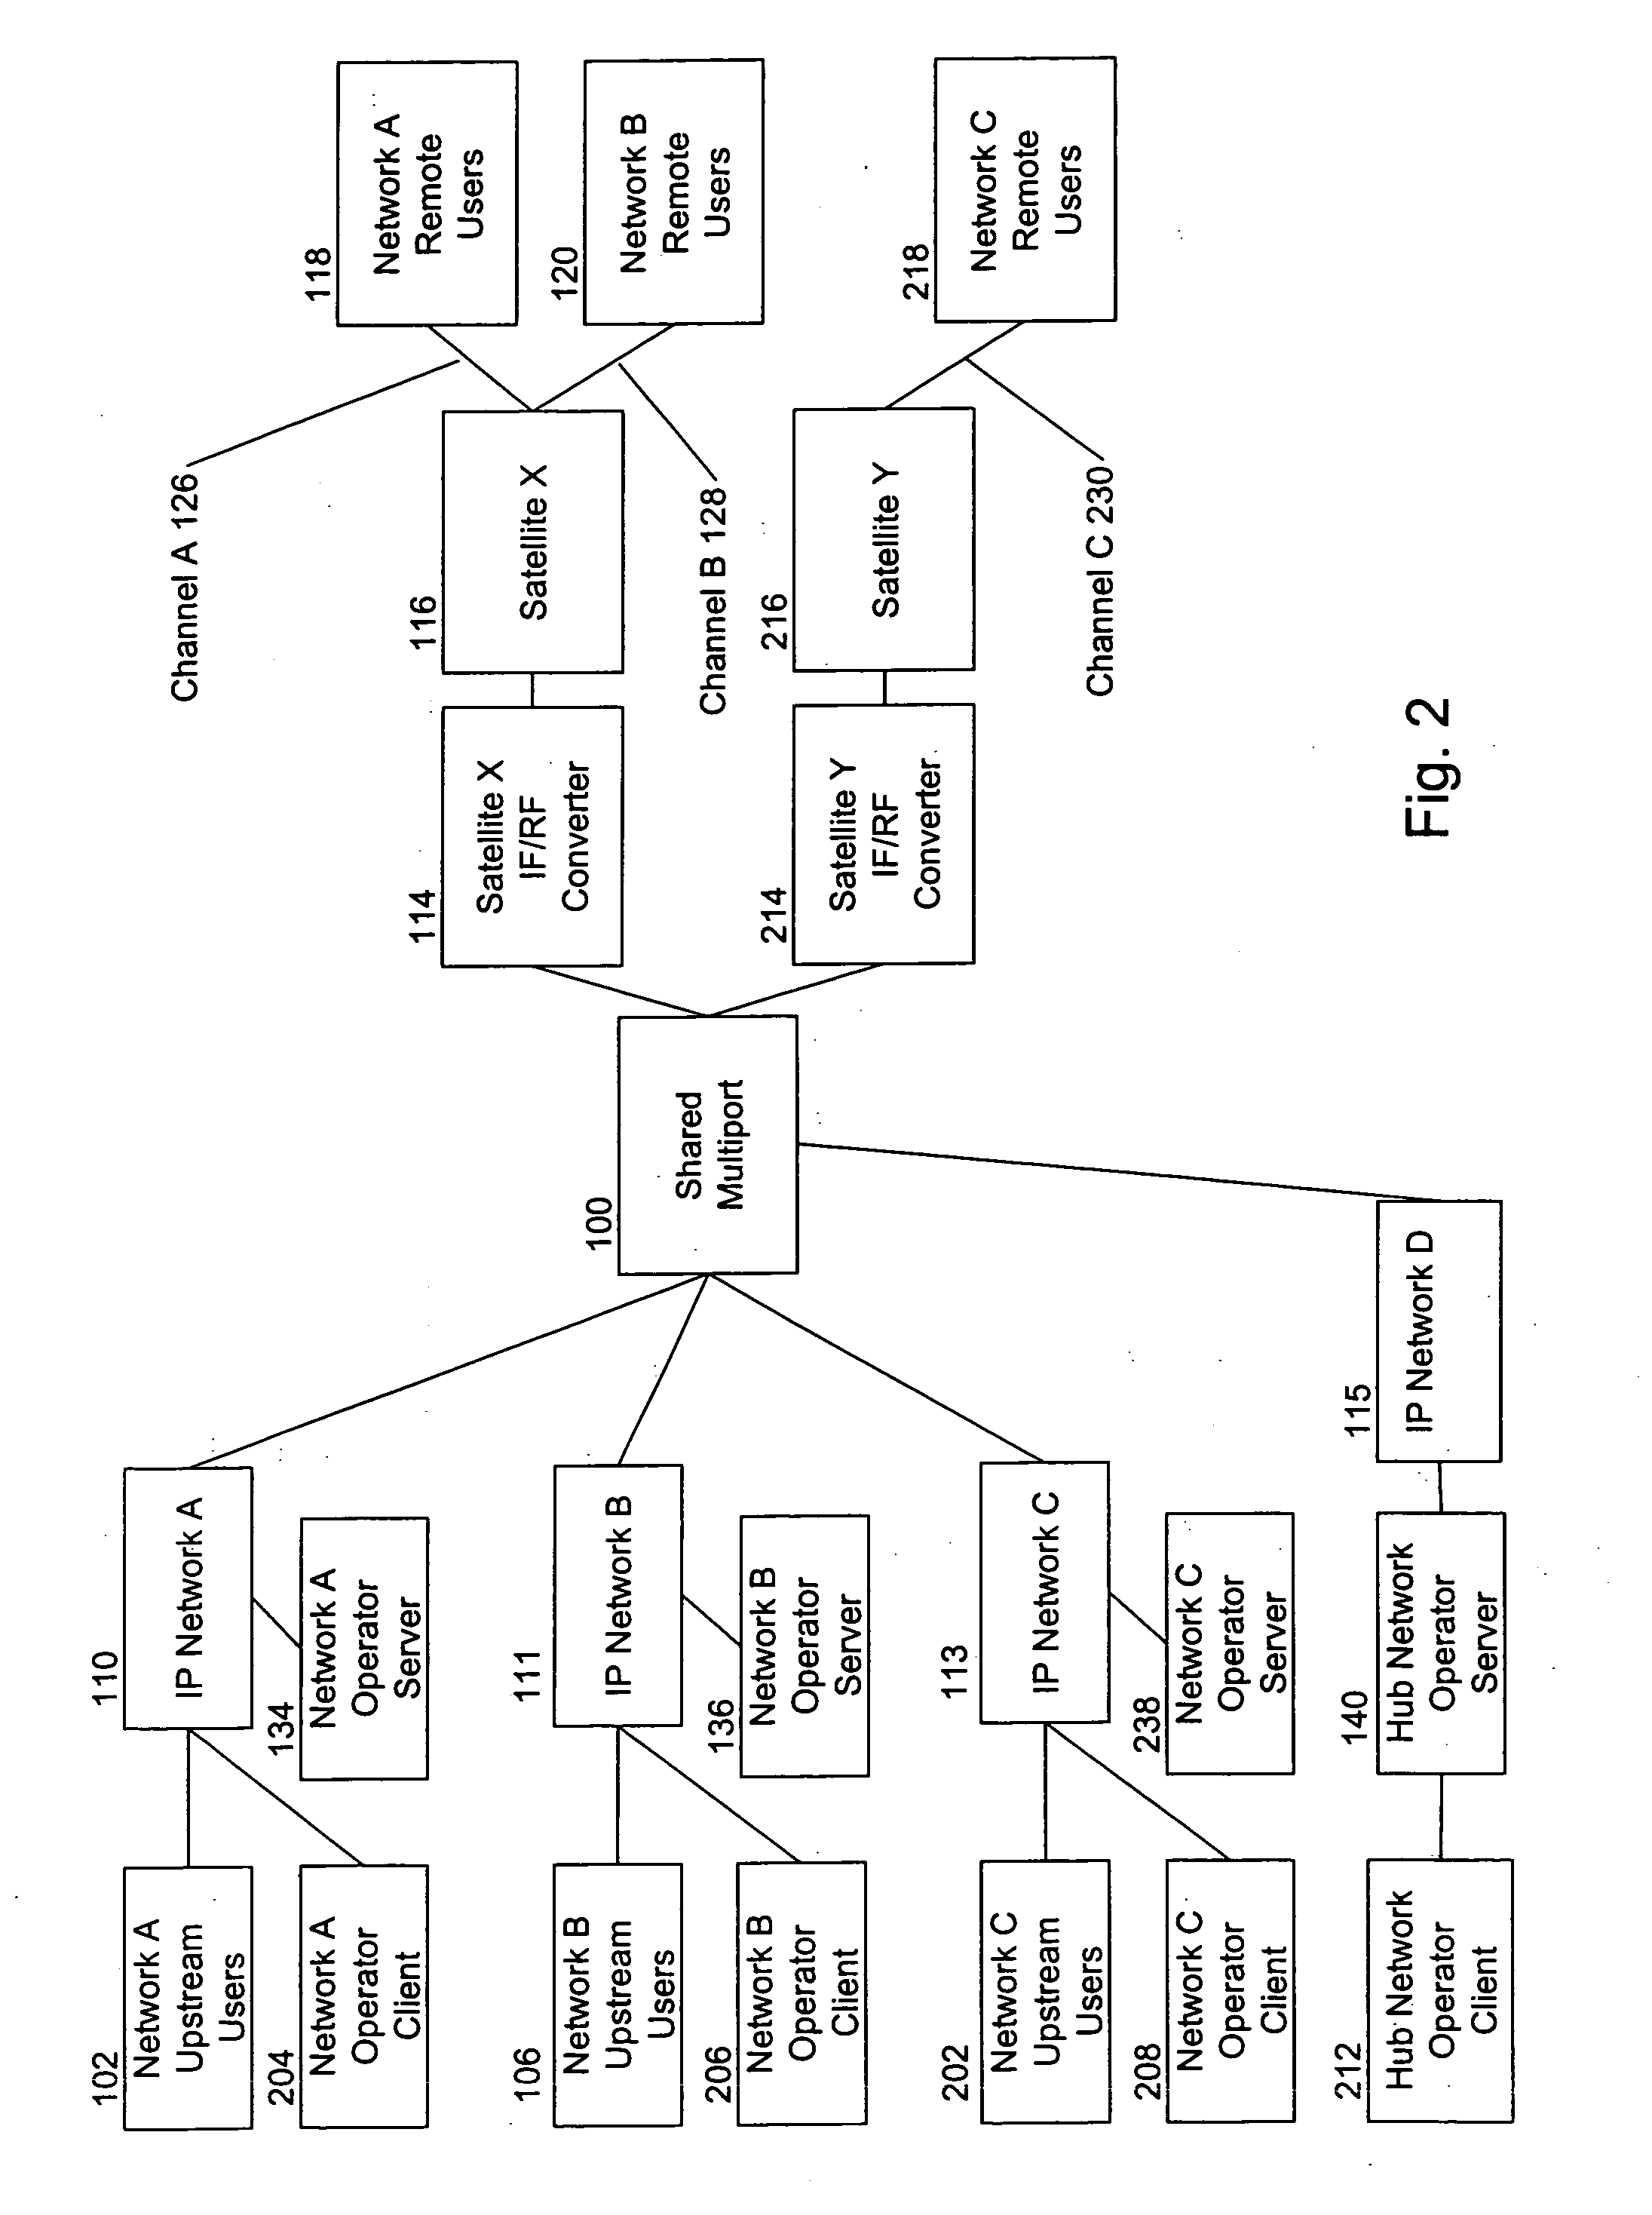 Virtual network operator system, method and apparatus